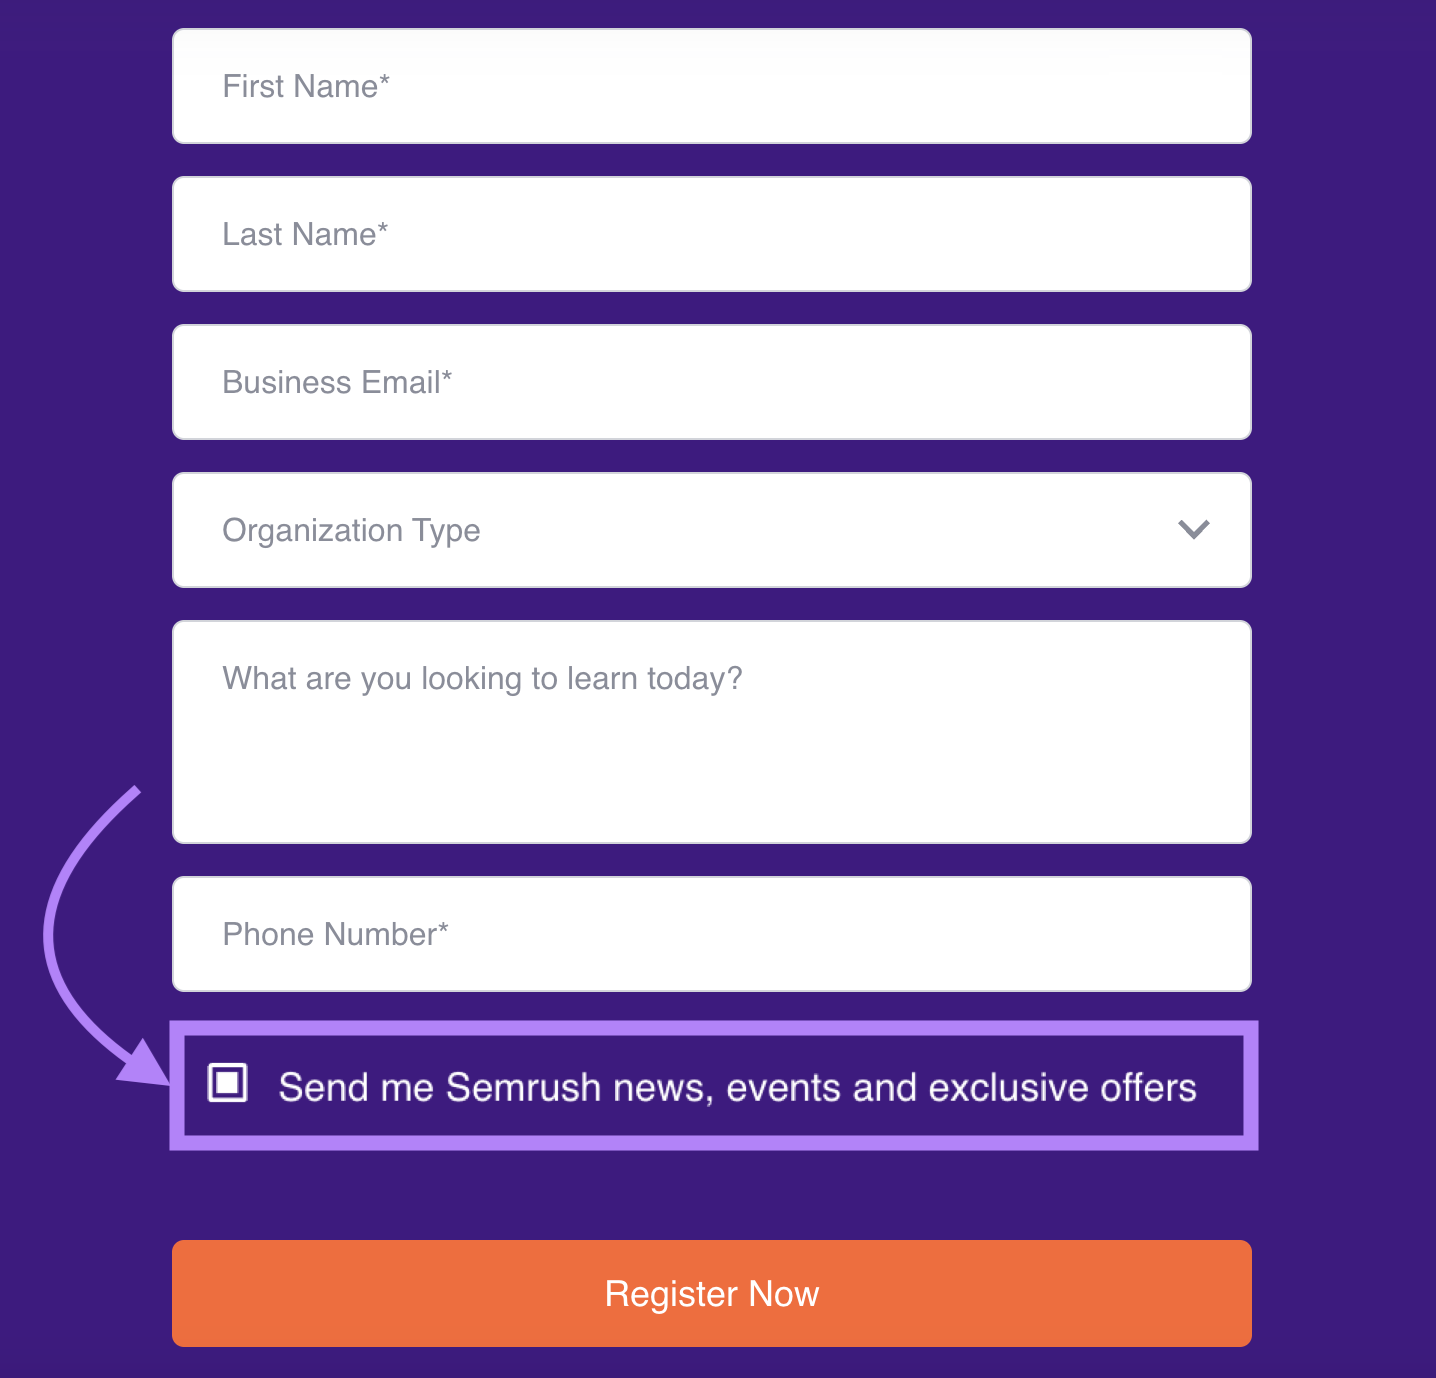 "Send me Semrush news, events and exclusive offers" opt-in at the bottom of Semrush's form